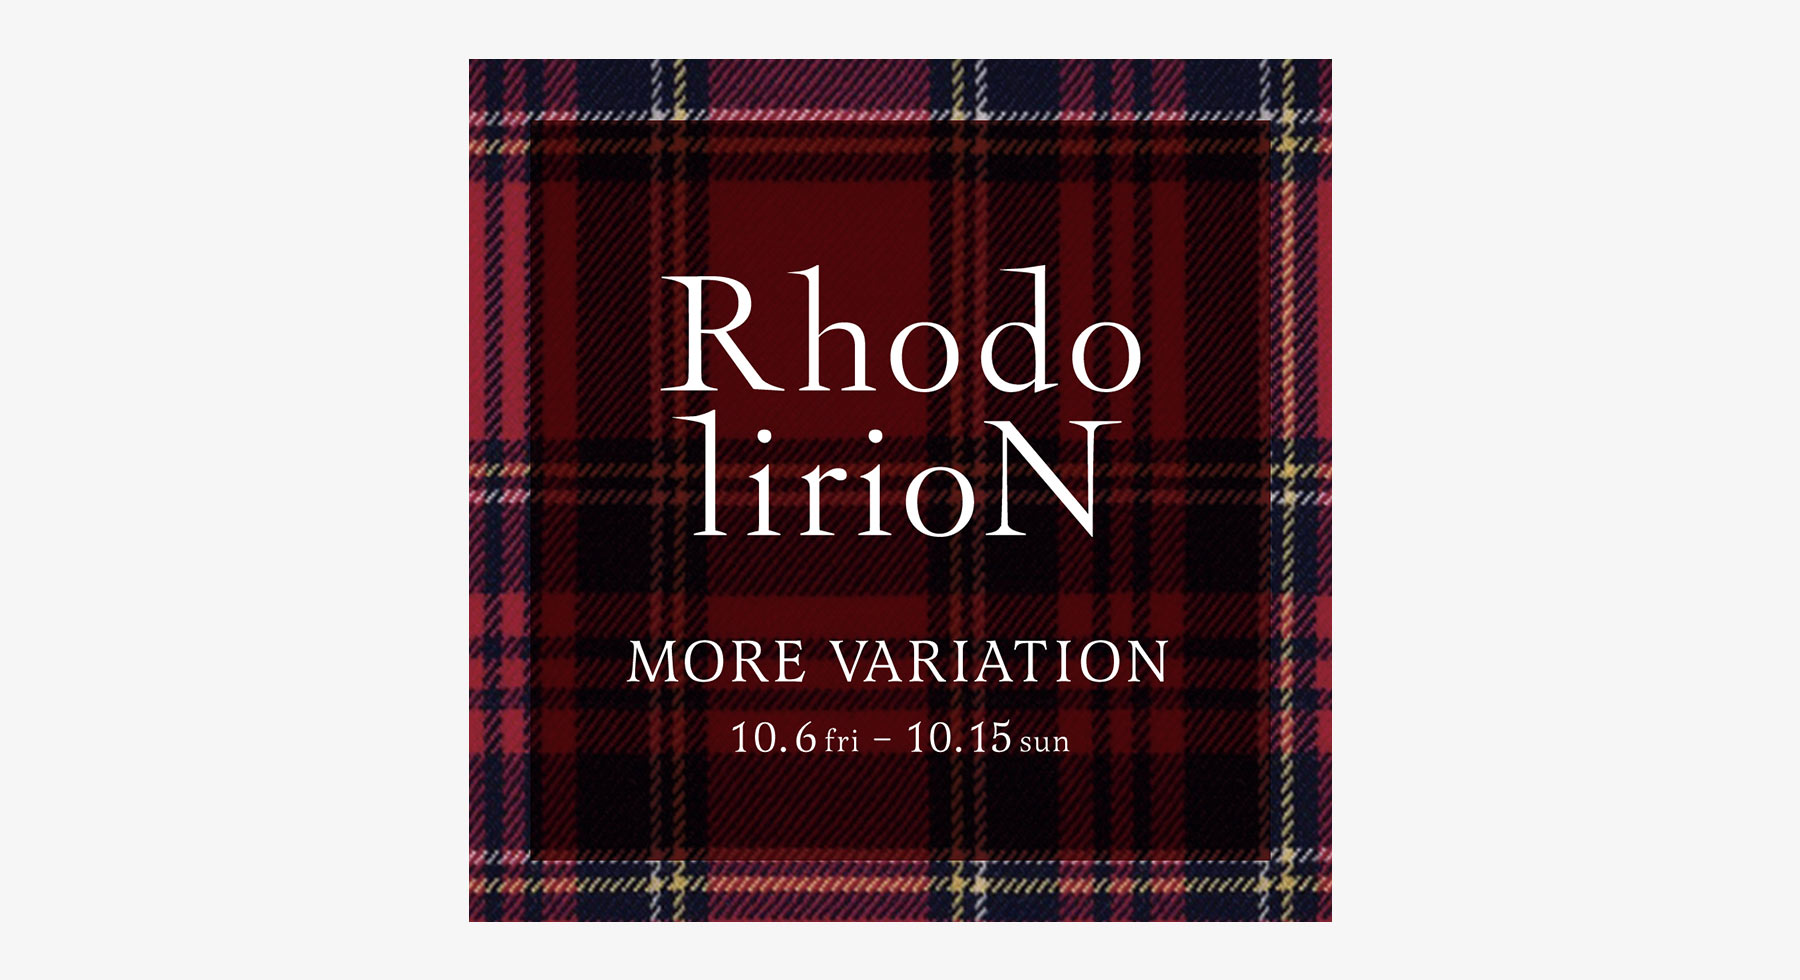 〈RHODOLIRION〉 2023 Fall Winter Collection in BEAMS